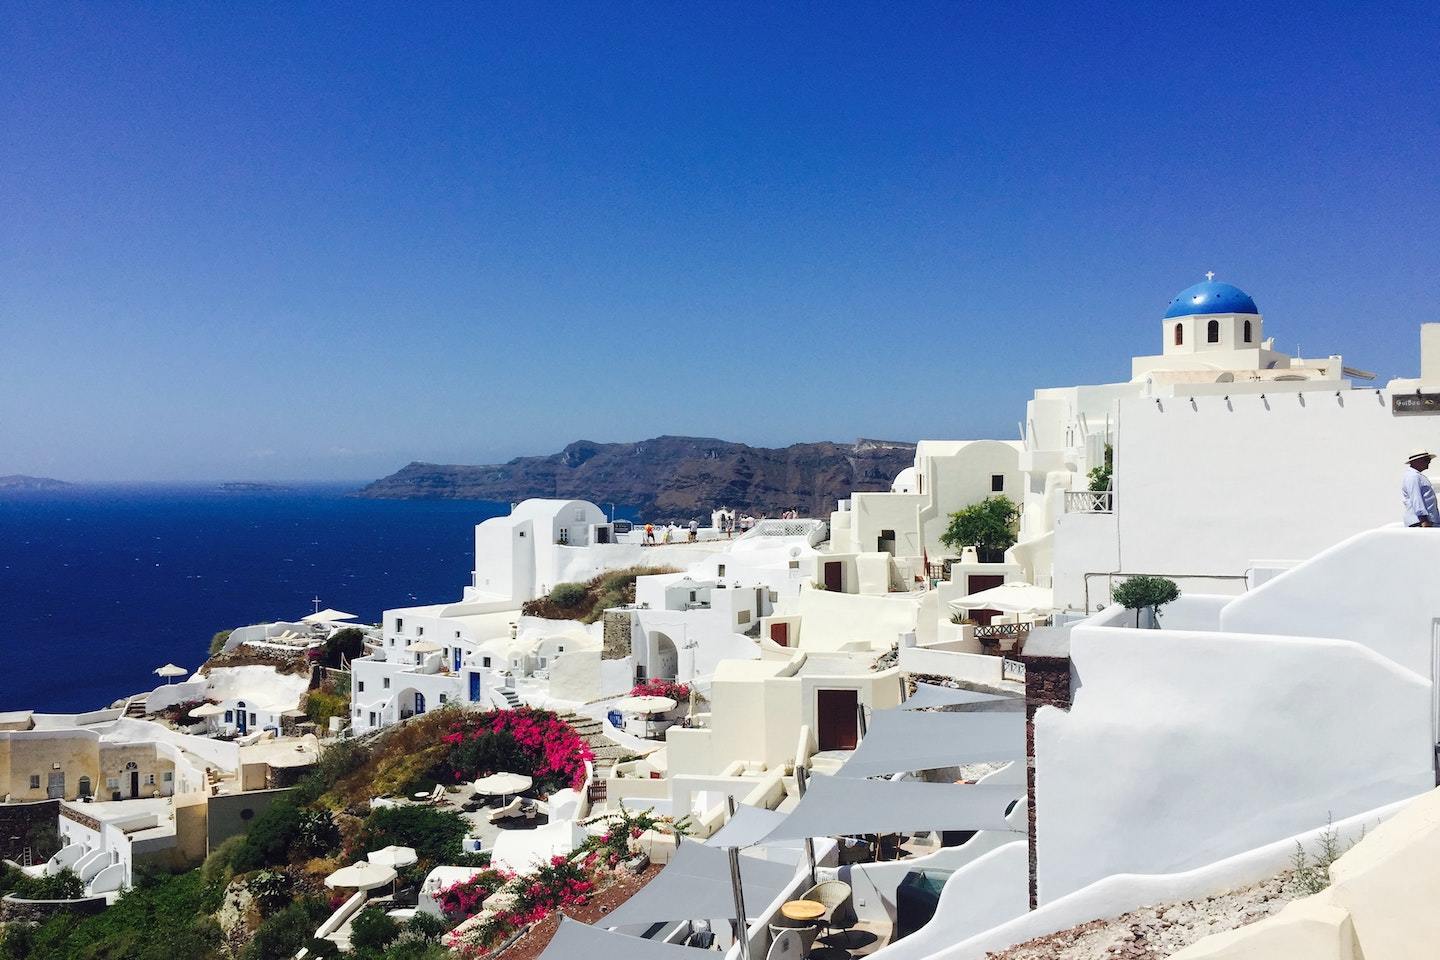 White buildings under a blue sky in Santorini, one of the best places to visit in Greece.